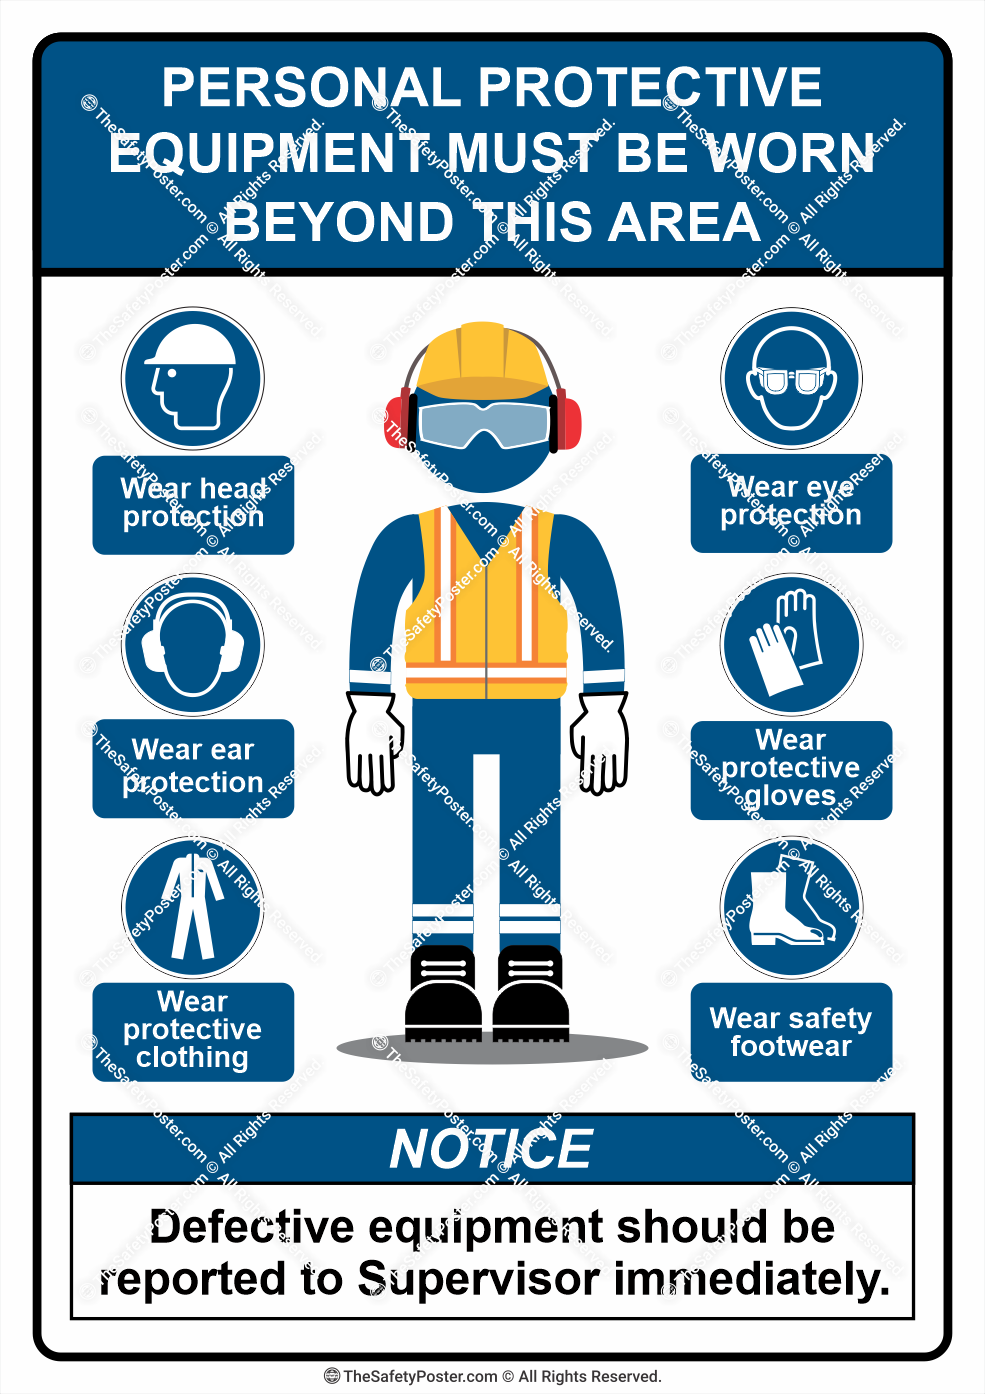 PPE must be worn | Personal Protective Equipment | PPE safety | PPE ...